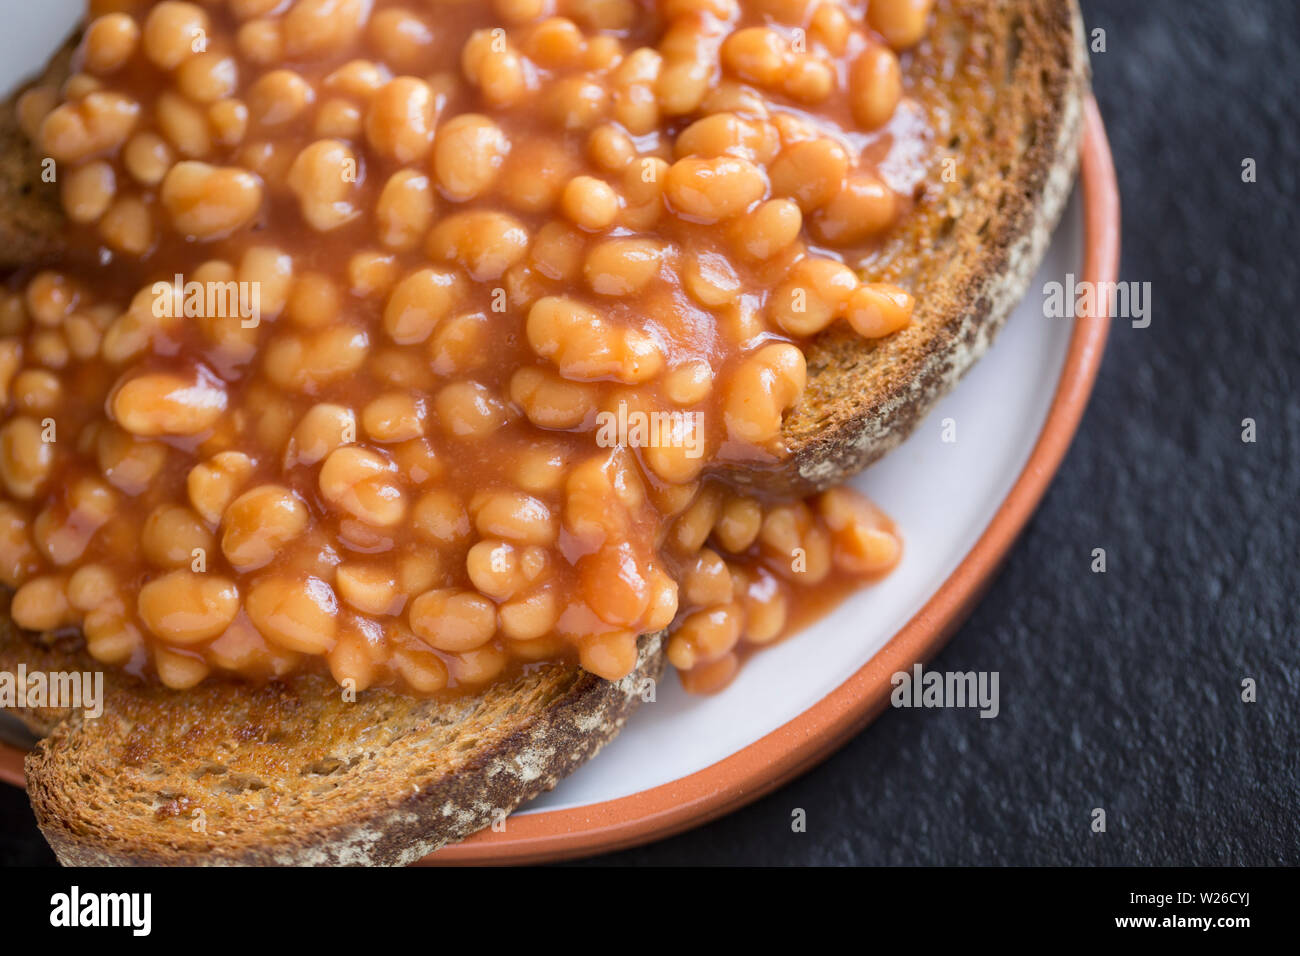 A portion of baked beans on toast served for breakfast. Dorset England UK GB Stock Photo